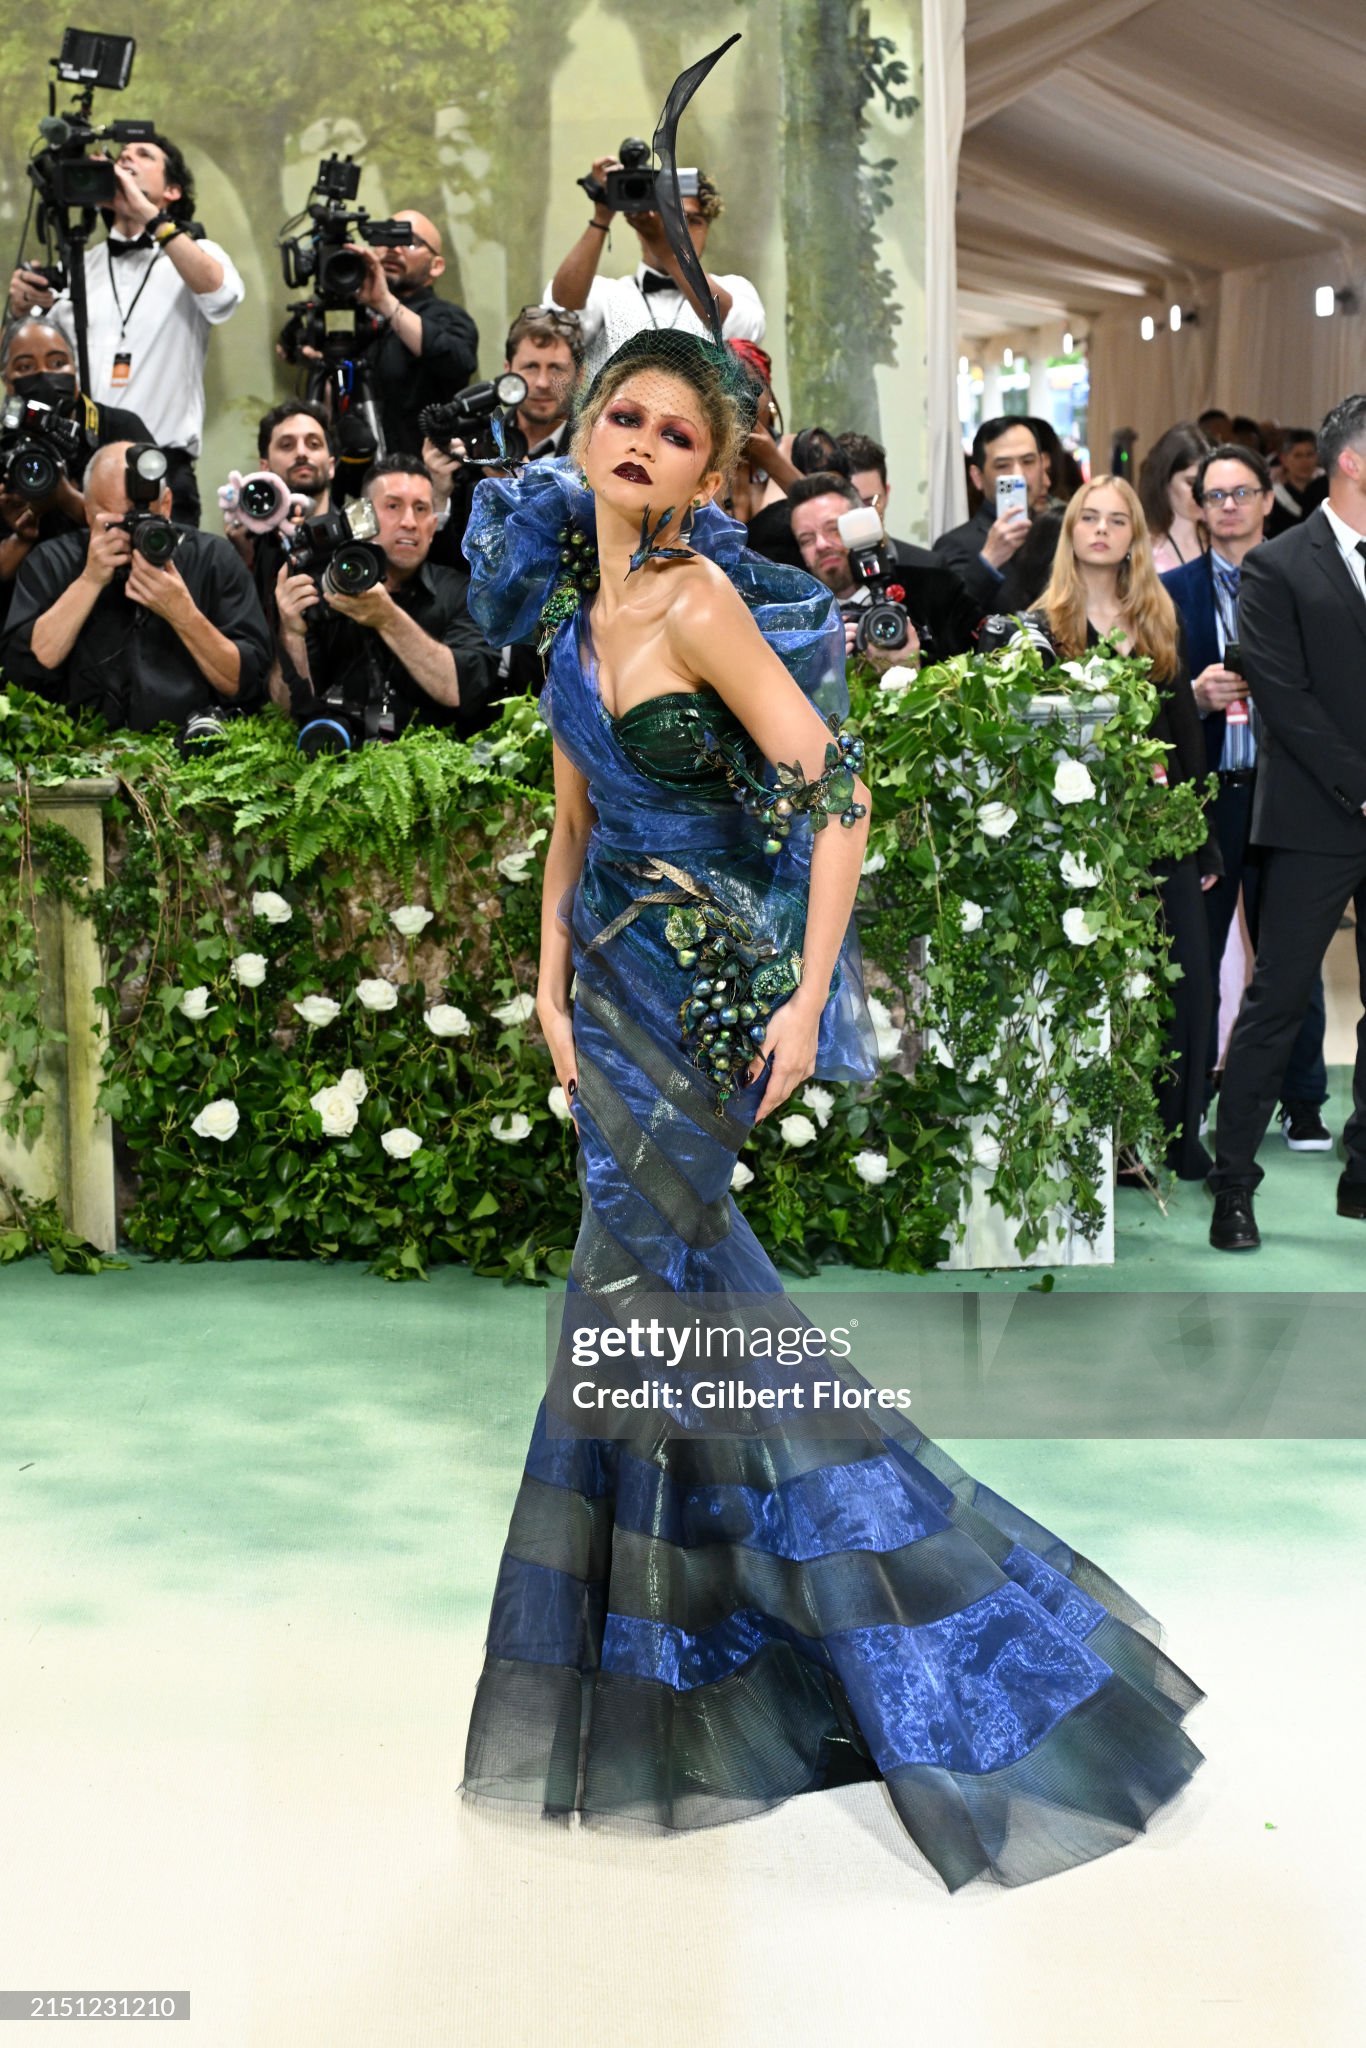 gettyimages-2151231210-2048x2048.jpg